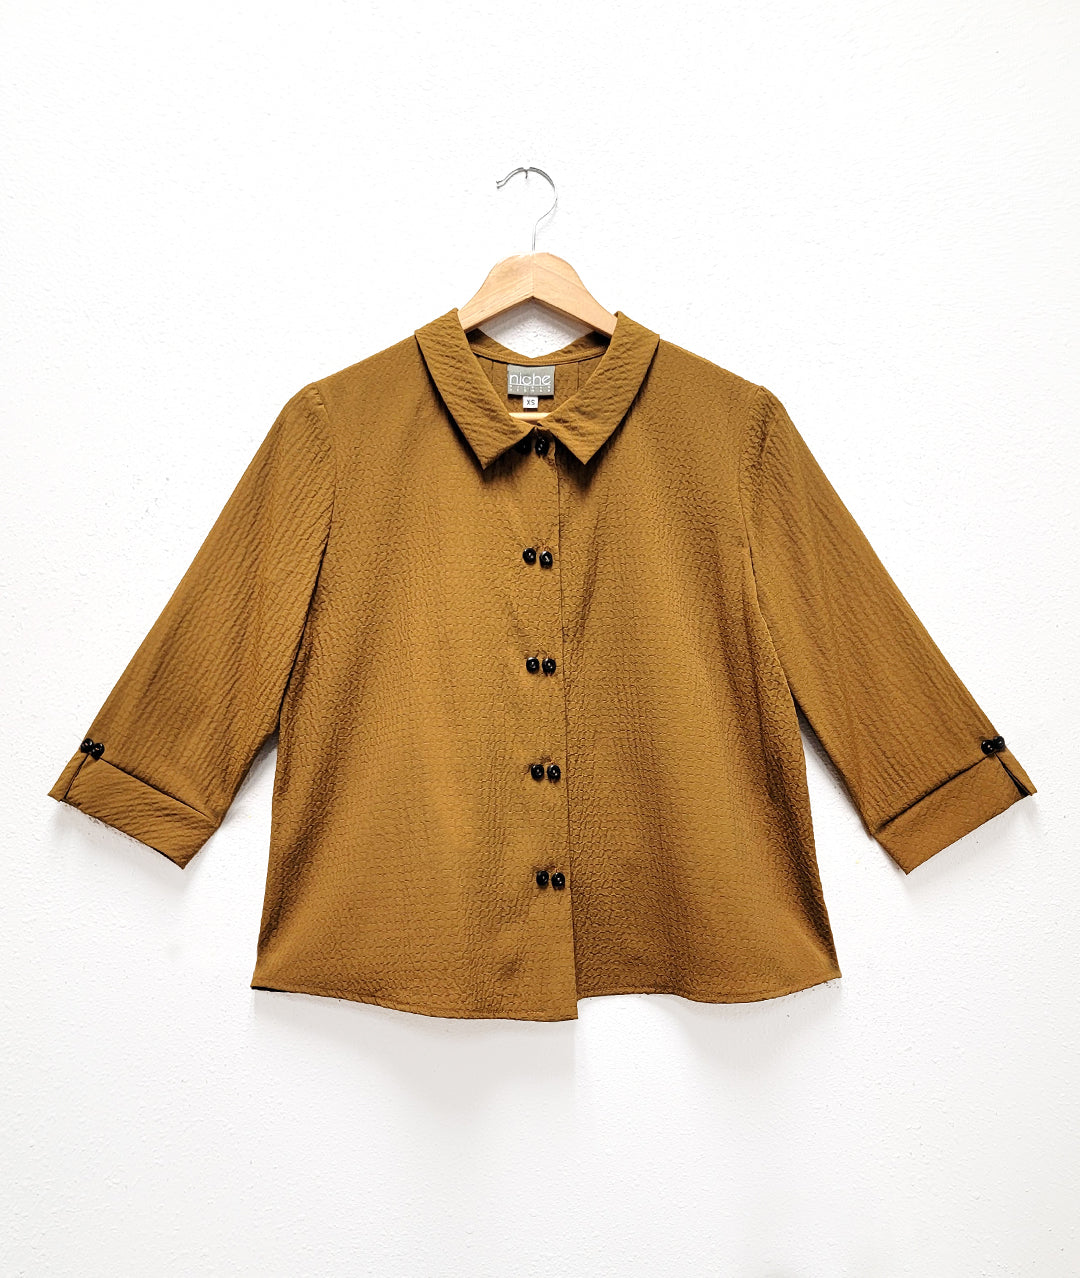 dijon yellow button down blouse with double sets of "twin" shell buttons down the front, easy a-line shape and straight hem. 3/4 length sleeves, with inverted pleat and open notched collar in back.